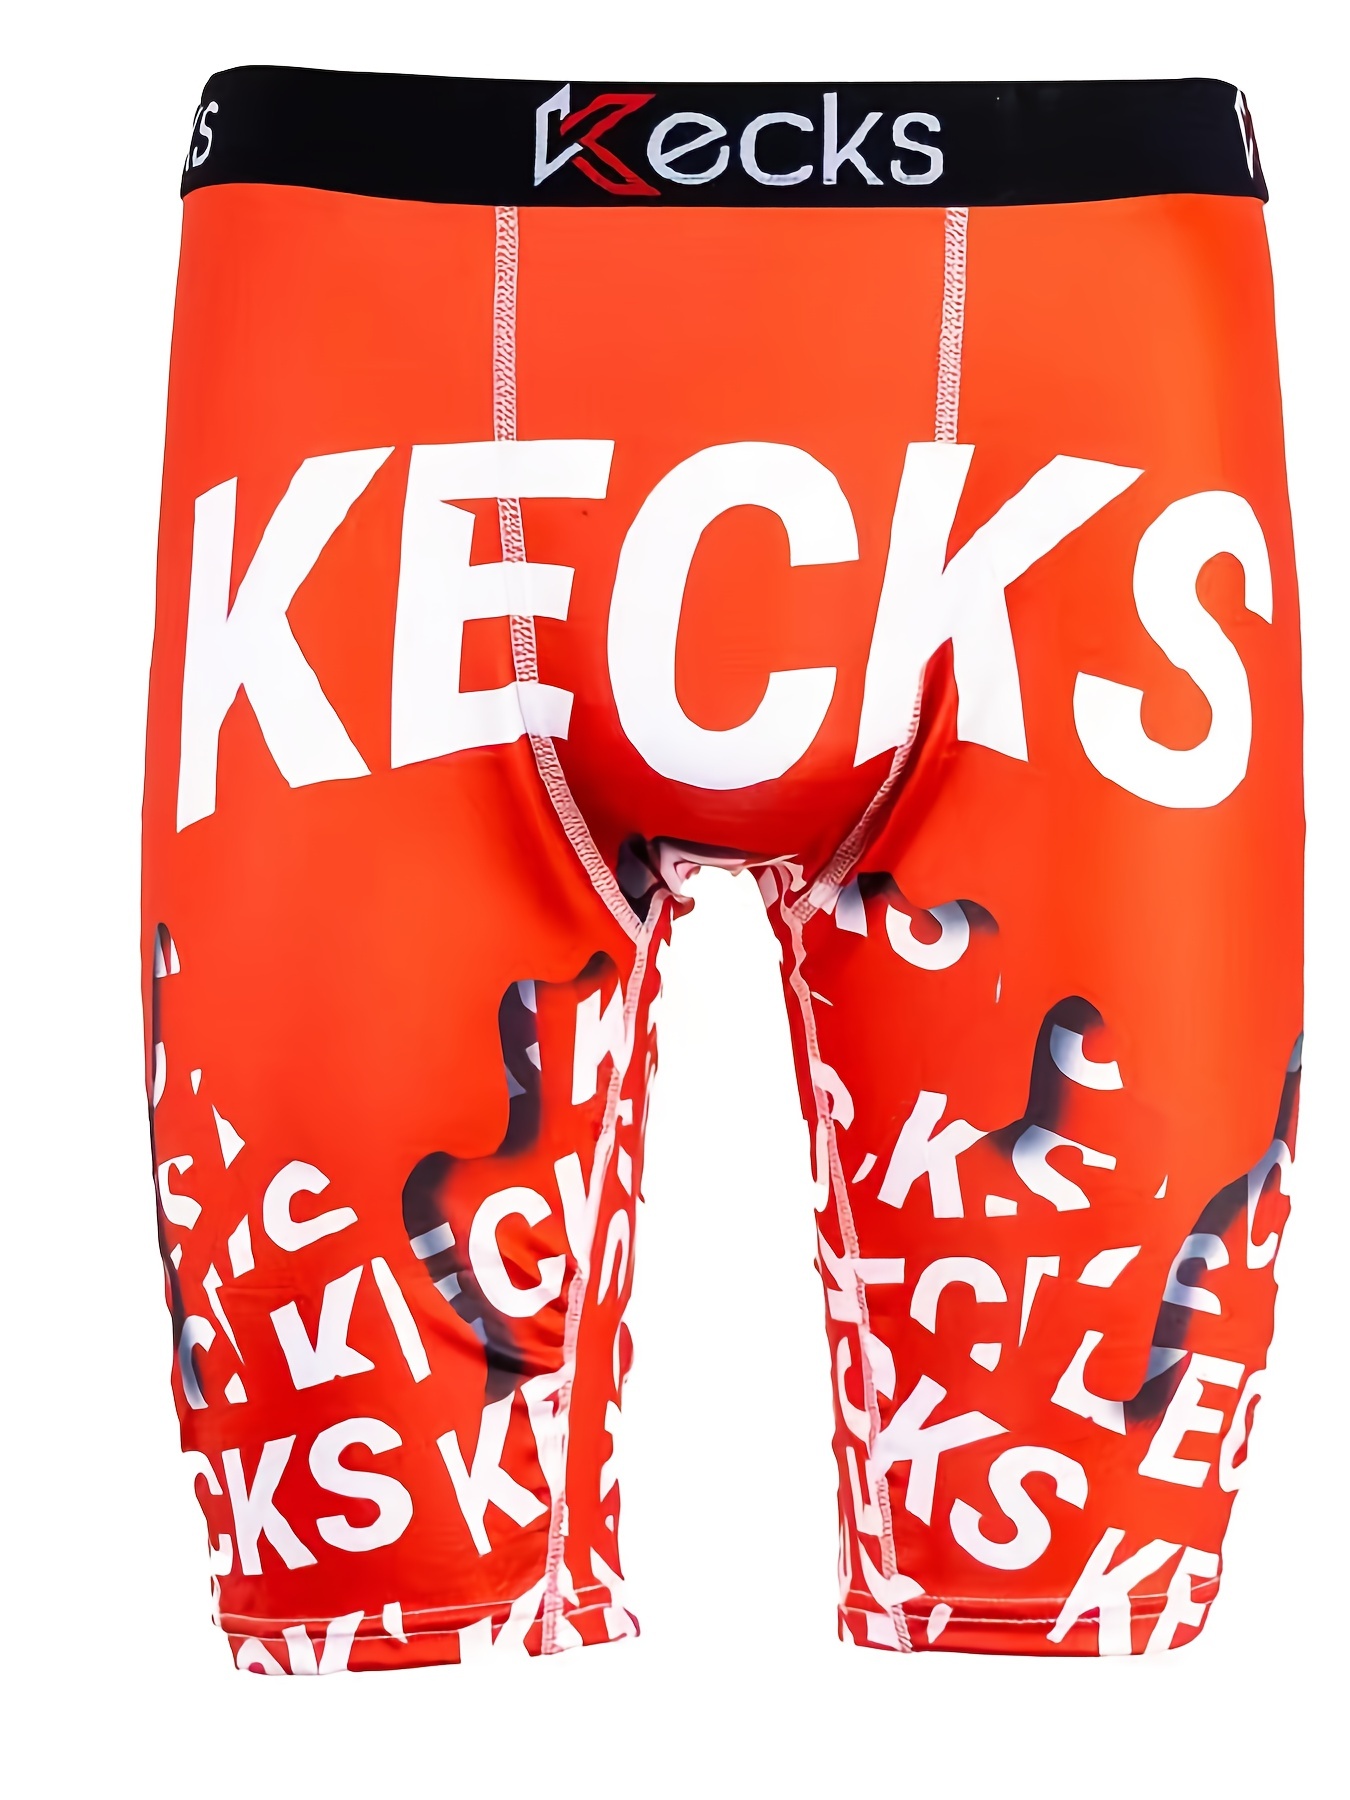 KECKS  Kecks is designed for the guy who seeks the ultimate